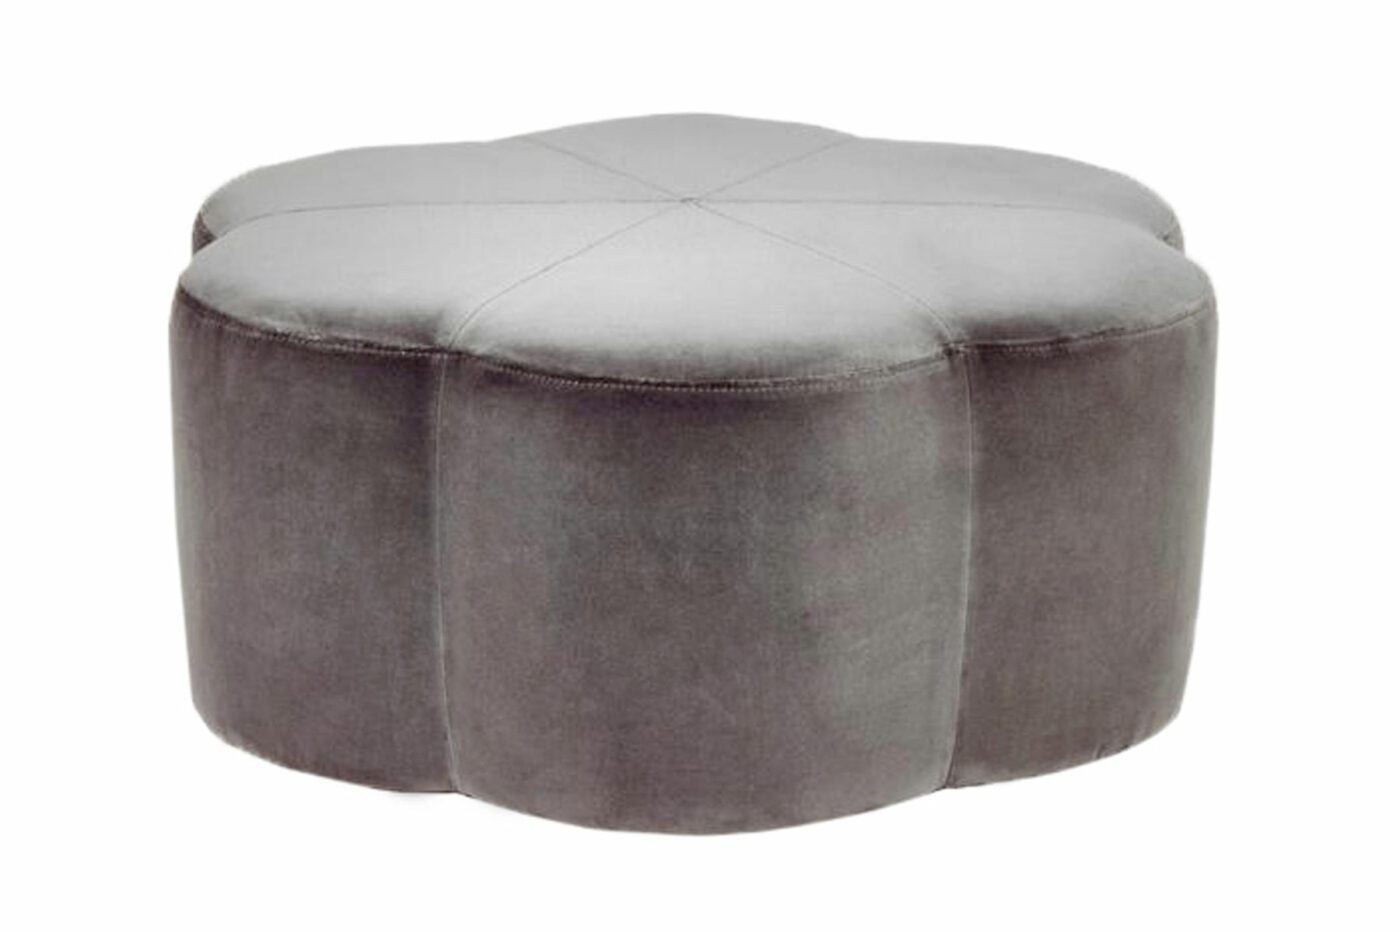 Introducing: The Flora Pouf